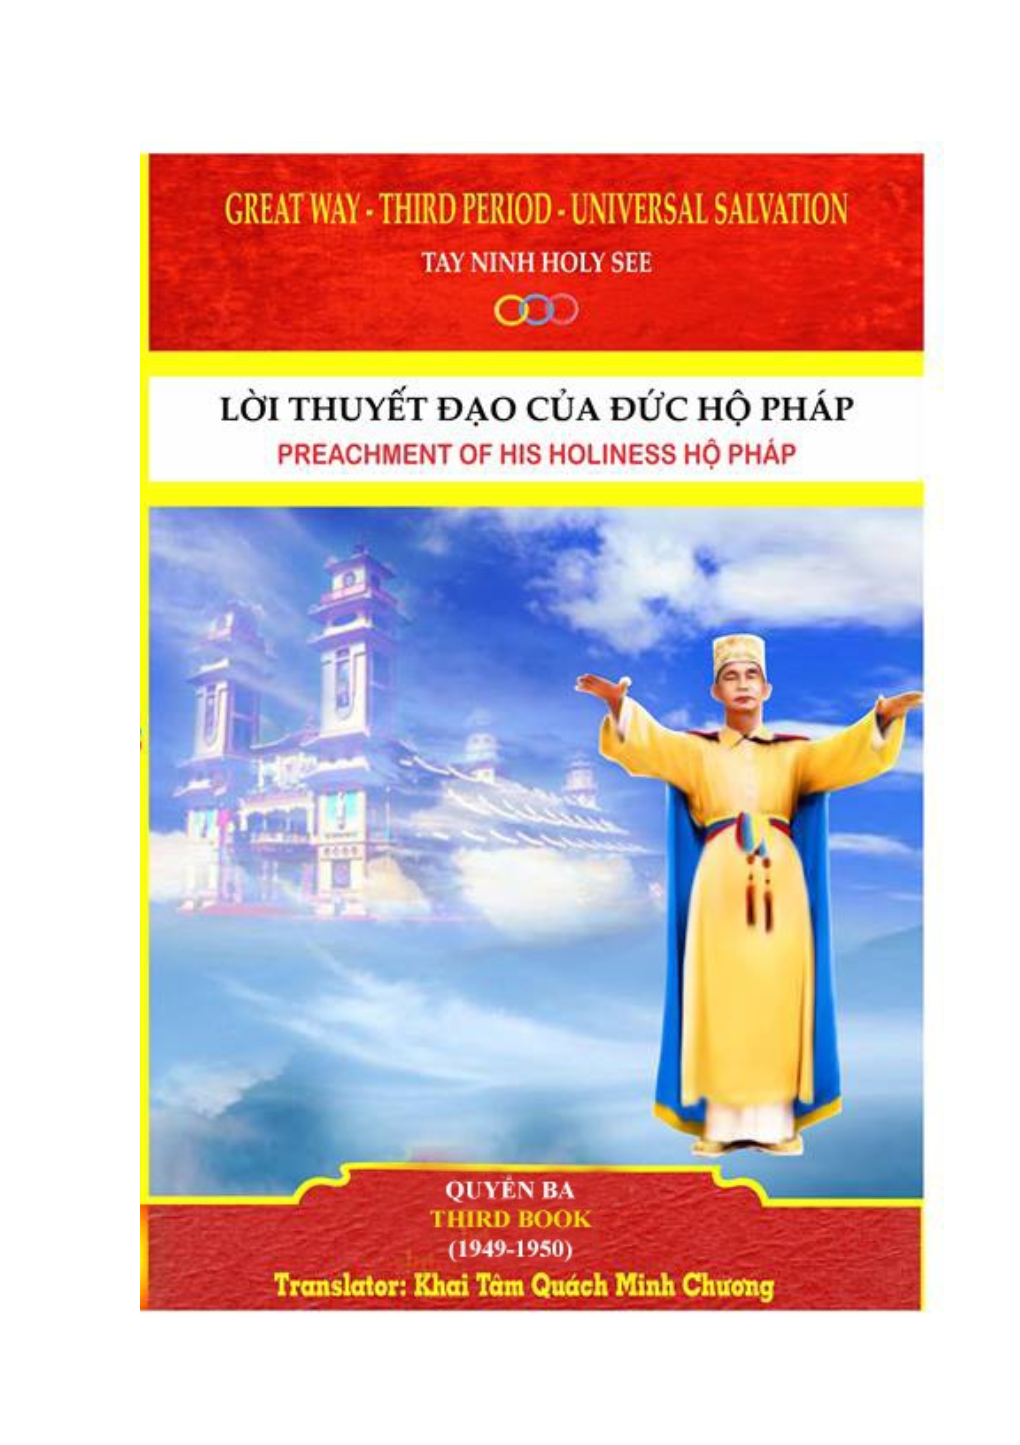 Holy Letter of His Holiness Thượng Sanh